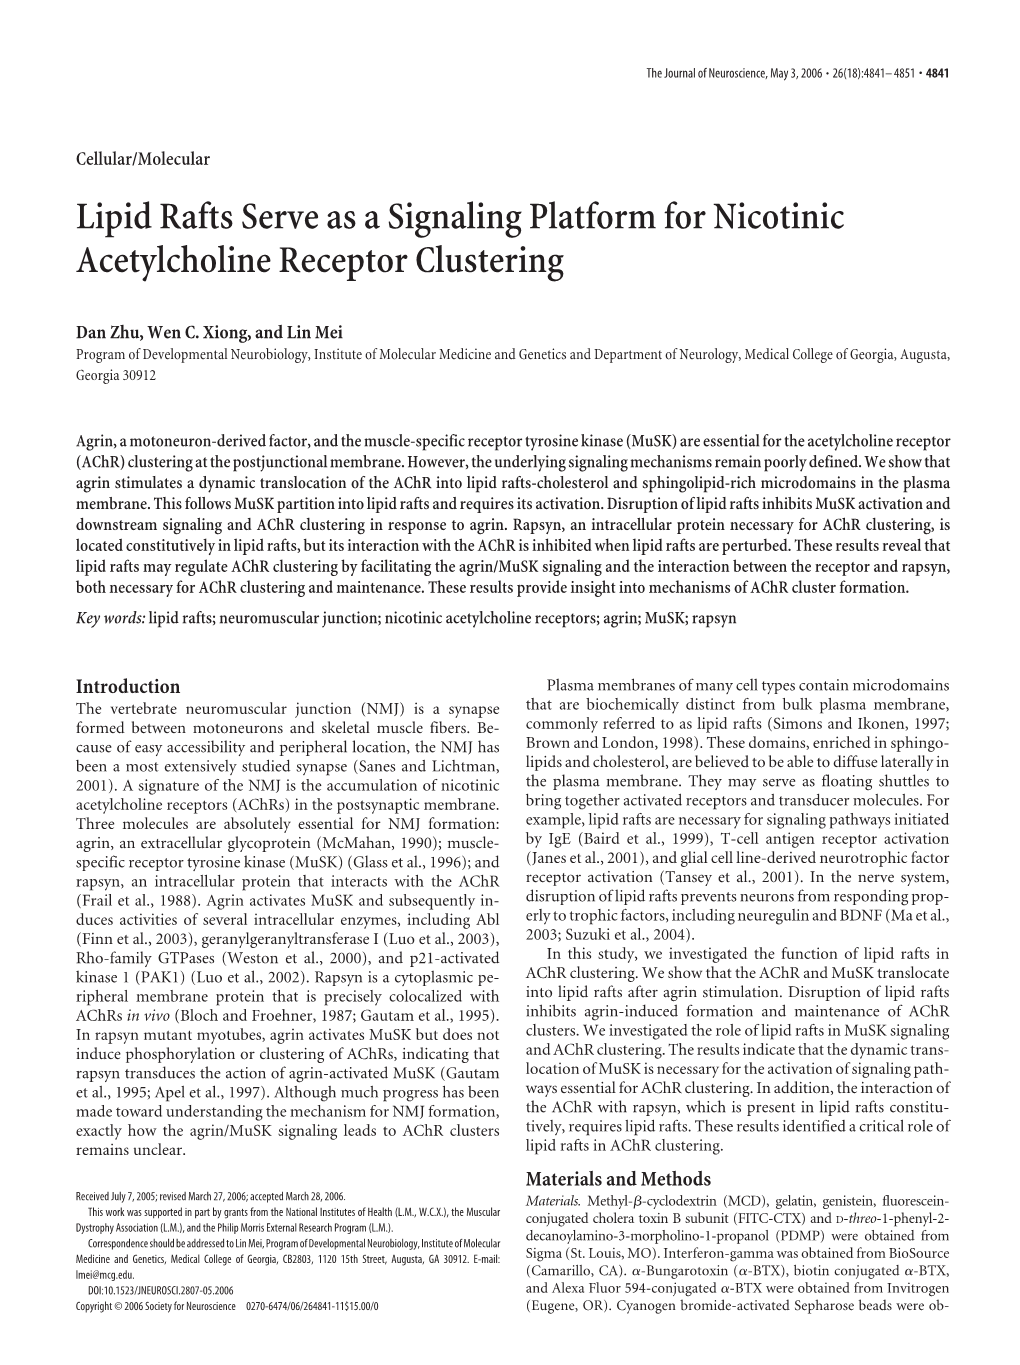 Lipid Rafts Serve As a Signaling Platform for Nicotinic Acetylcholine Receptor Clustering